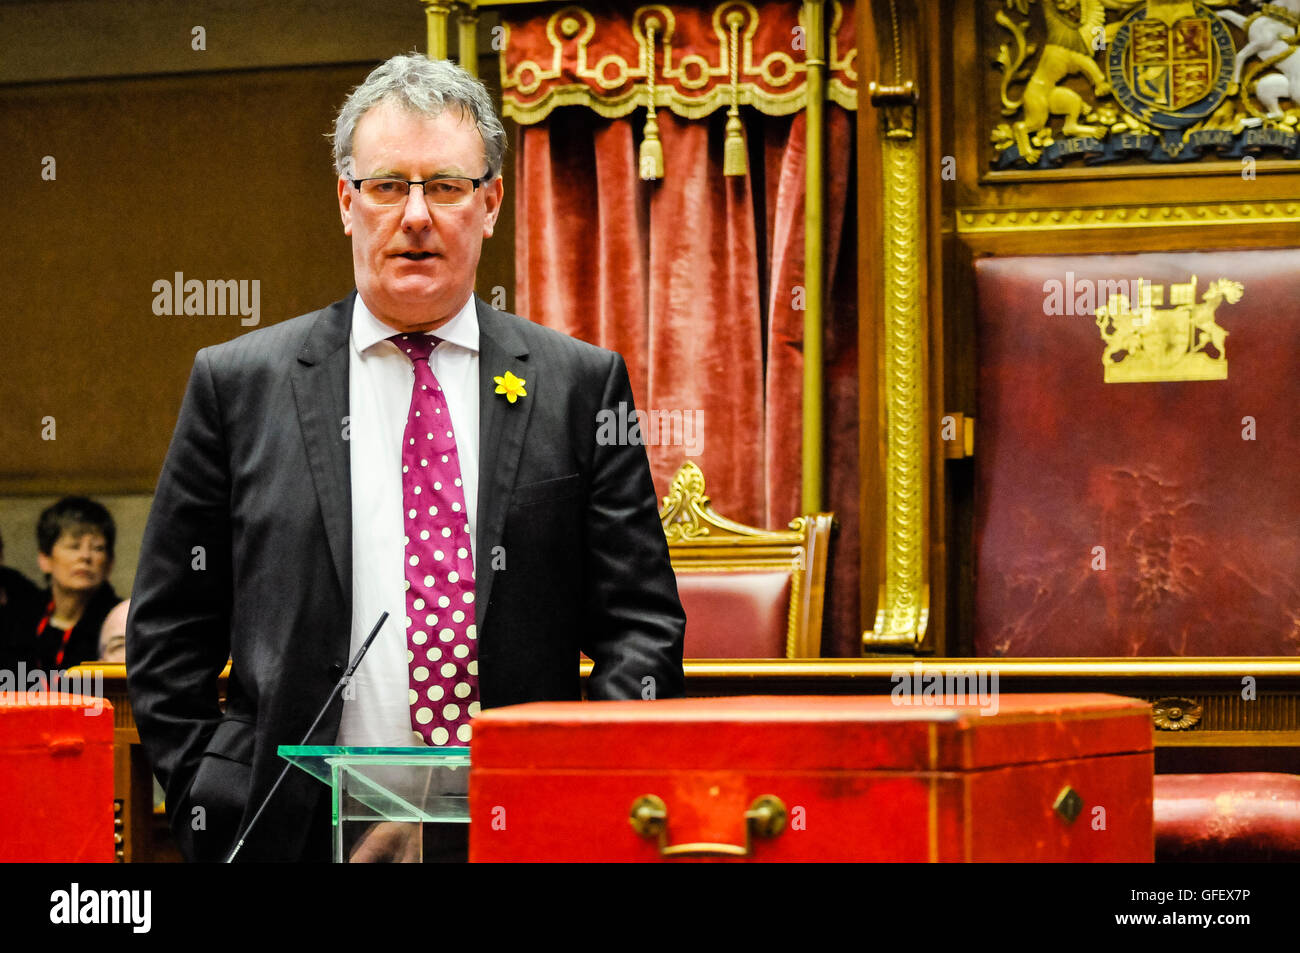 Belfast, Northern Ireland. 10 Mar 2014 - Mike Nesbit (UUP leader) addresses the audience at the Victims' Day ceremony, Senate Chamber, Parliament Buildings, Stormont. Stock Photo